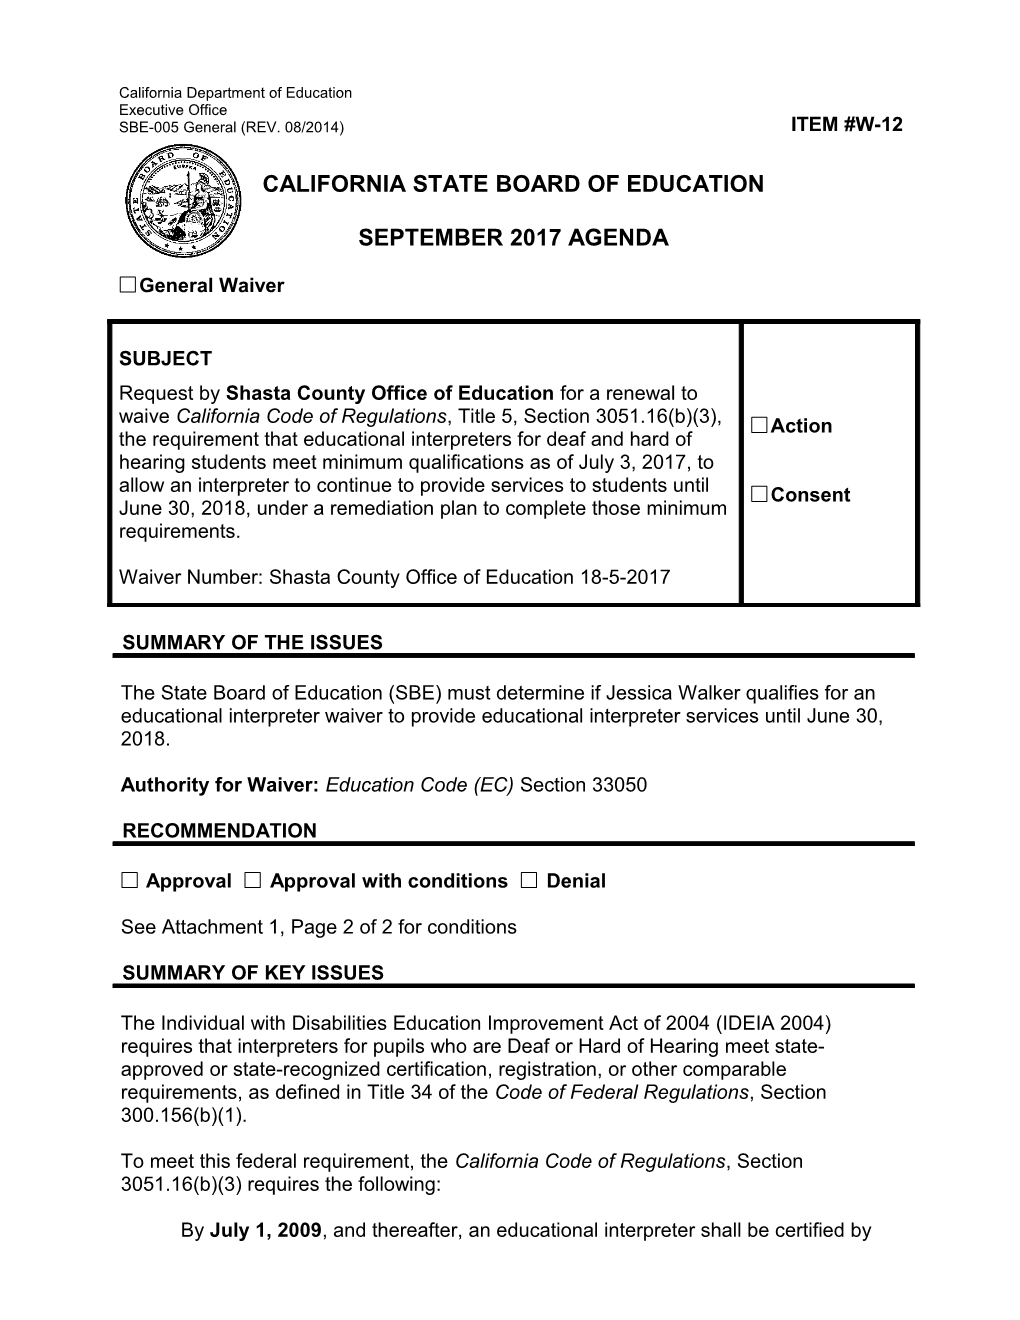 September 2017 Waiver Item W-12 - Meeting Agendas (CA State Board of Education)